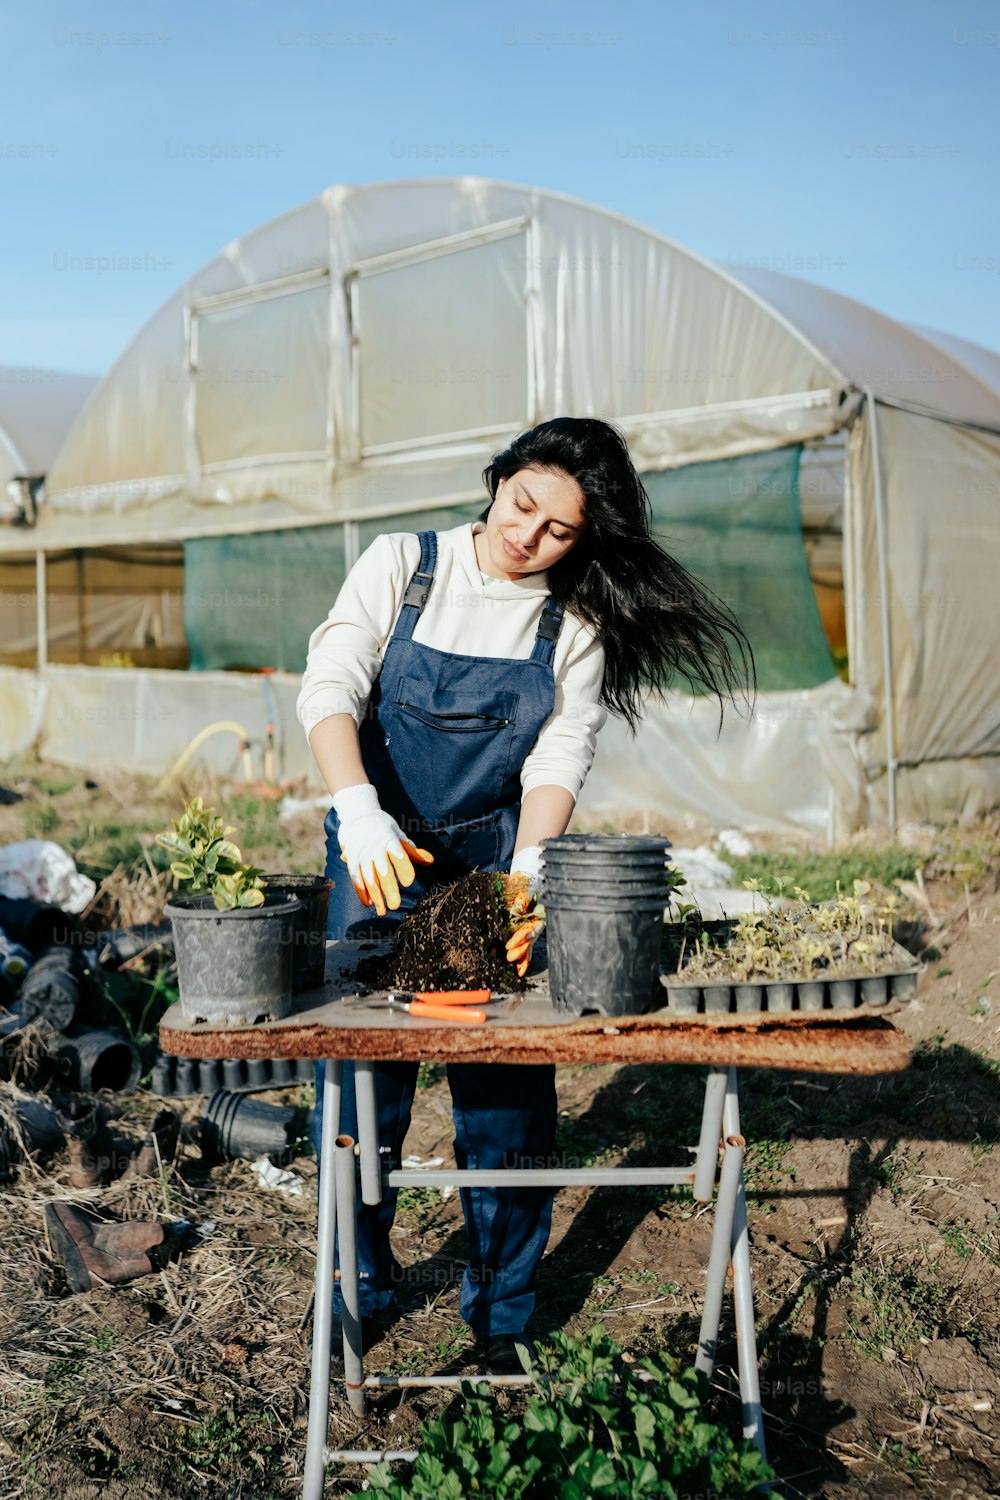 a woman in an apron is working in a garden